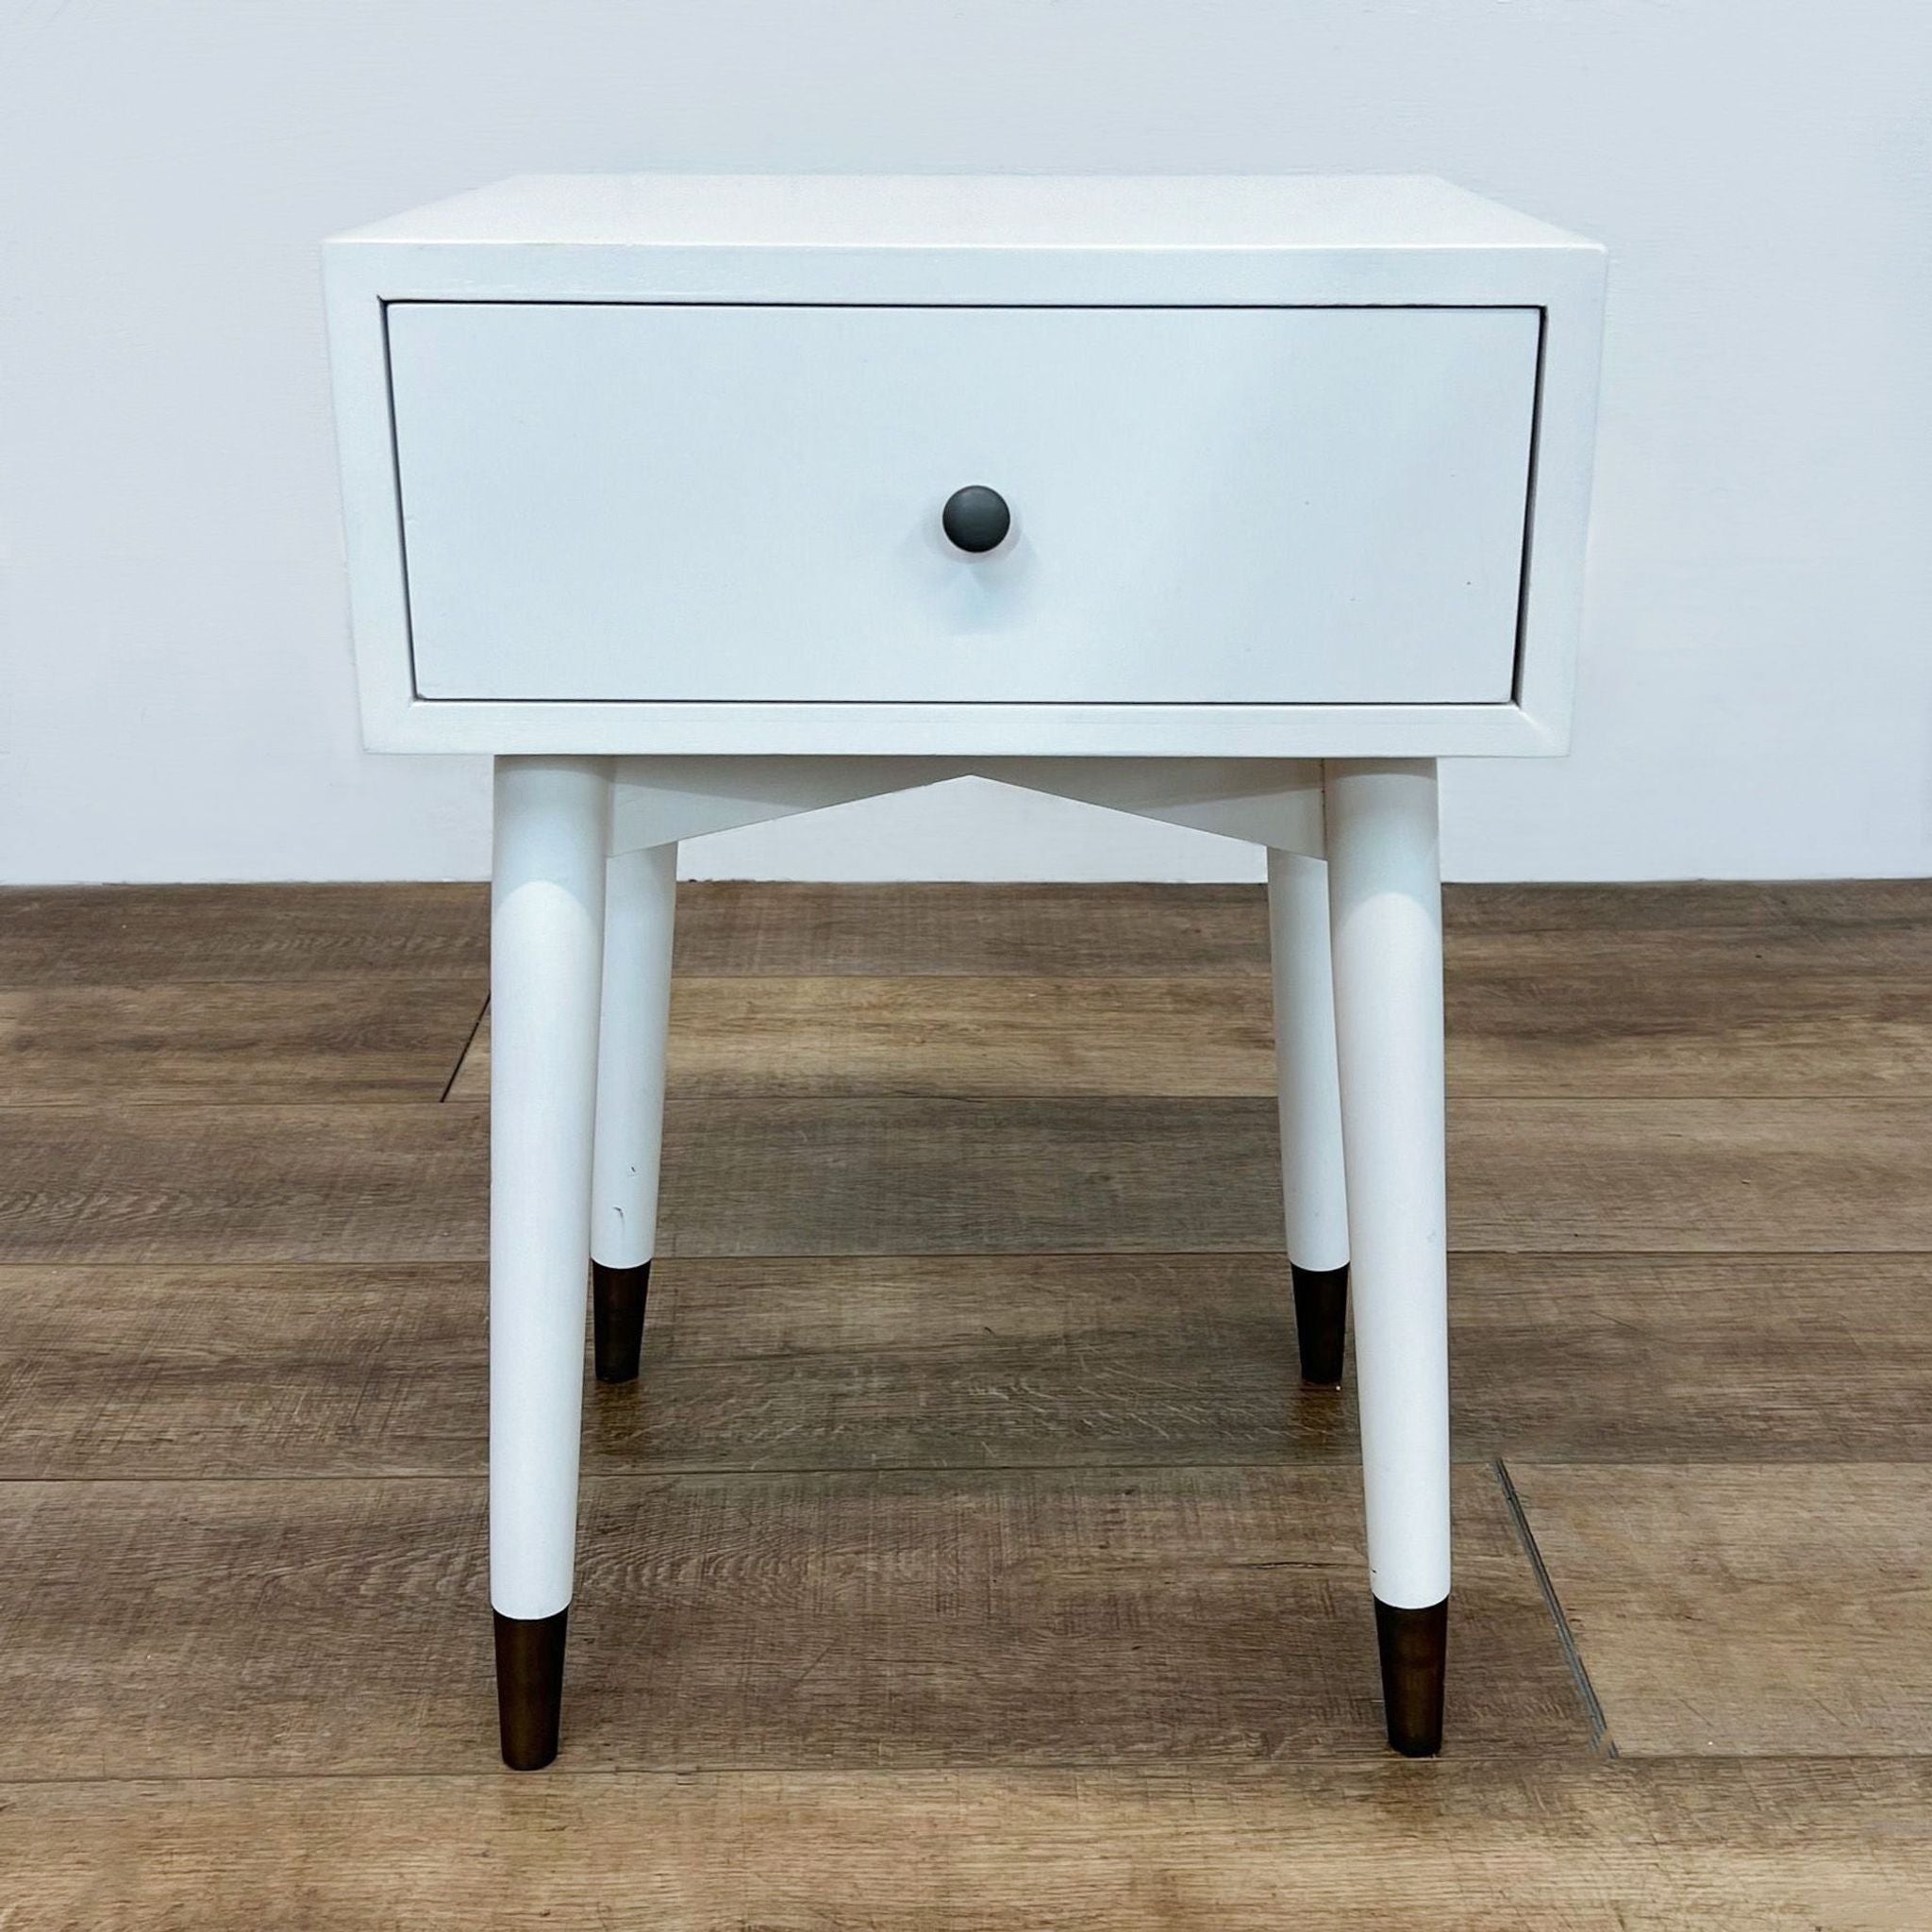 White Reperch end table with a single drawer and round knob, on a wood floor against a white wall.